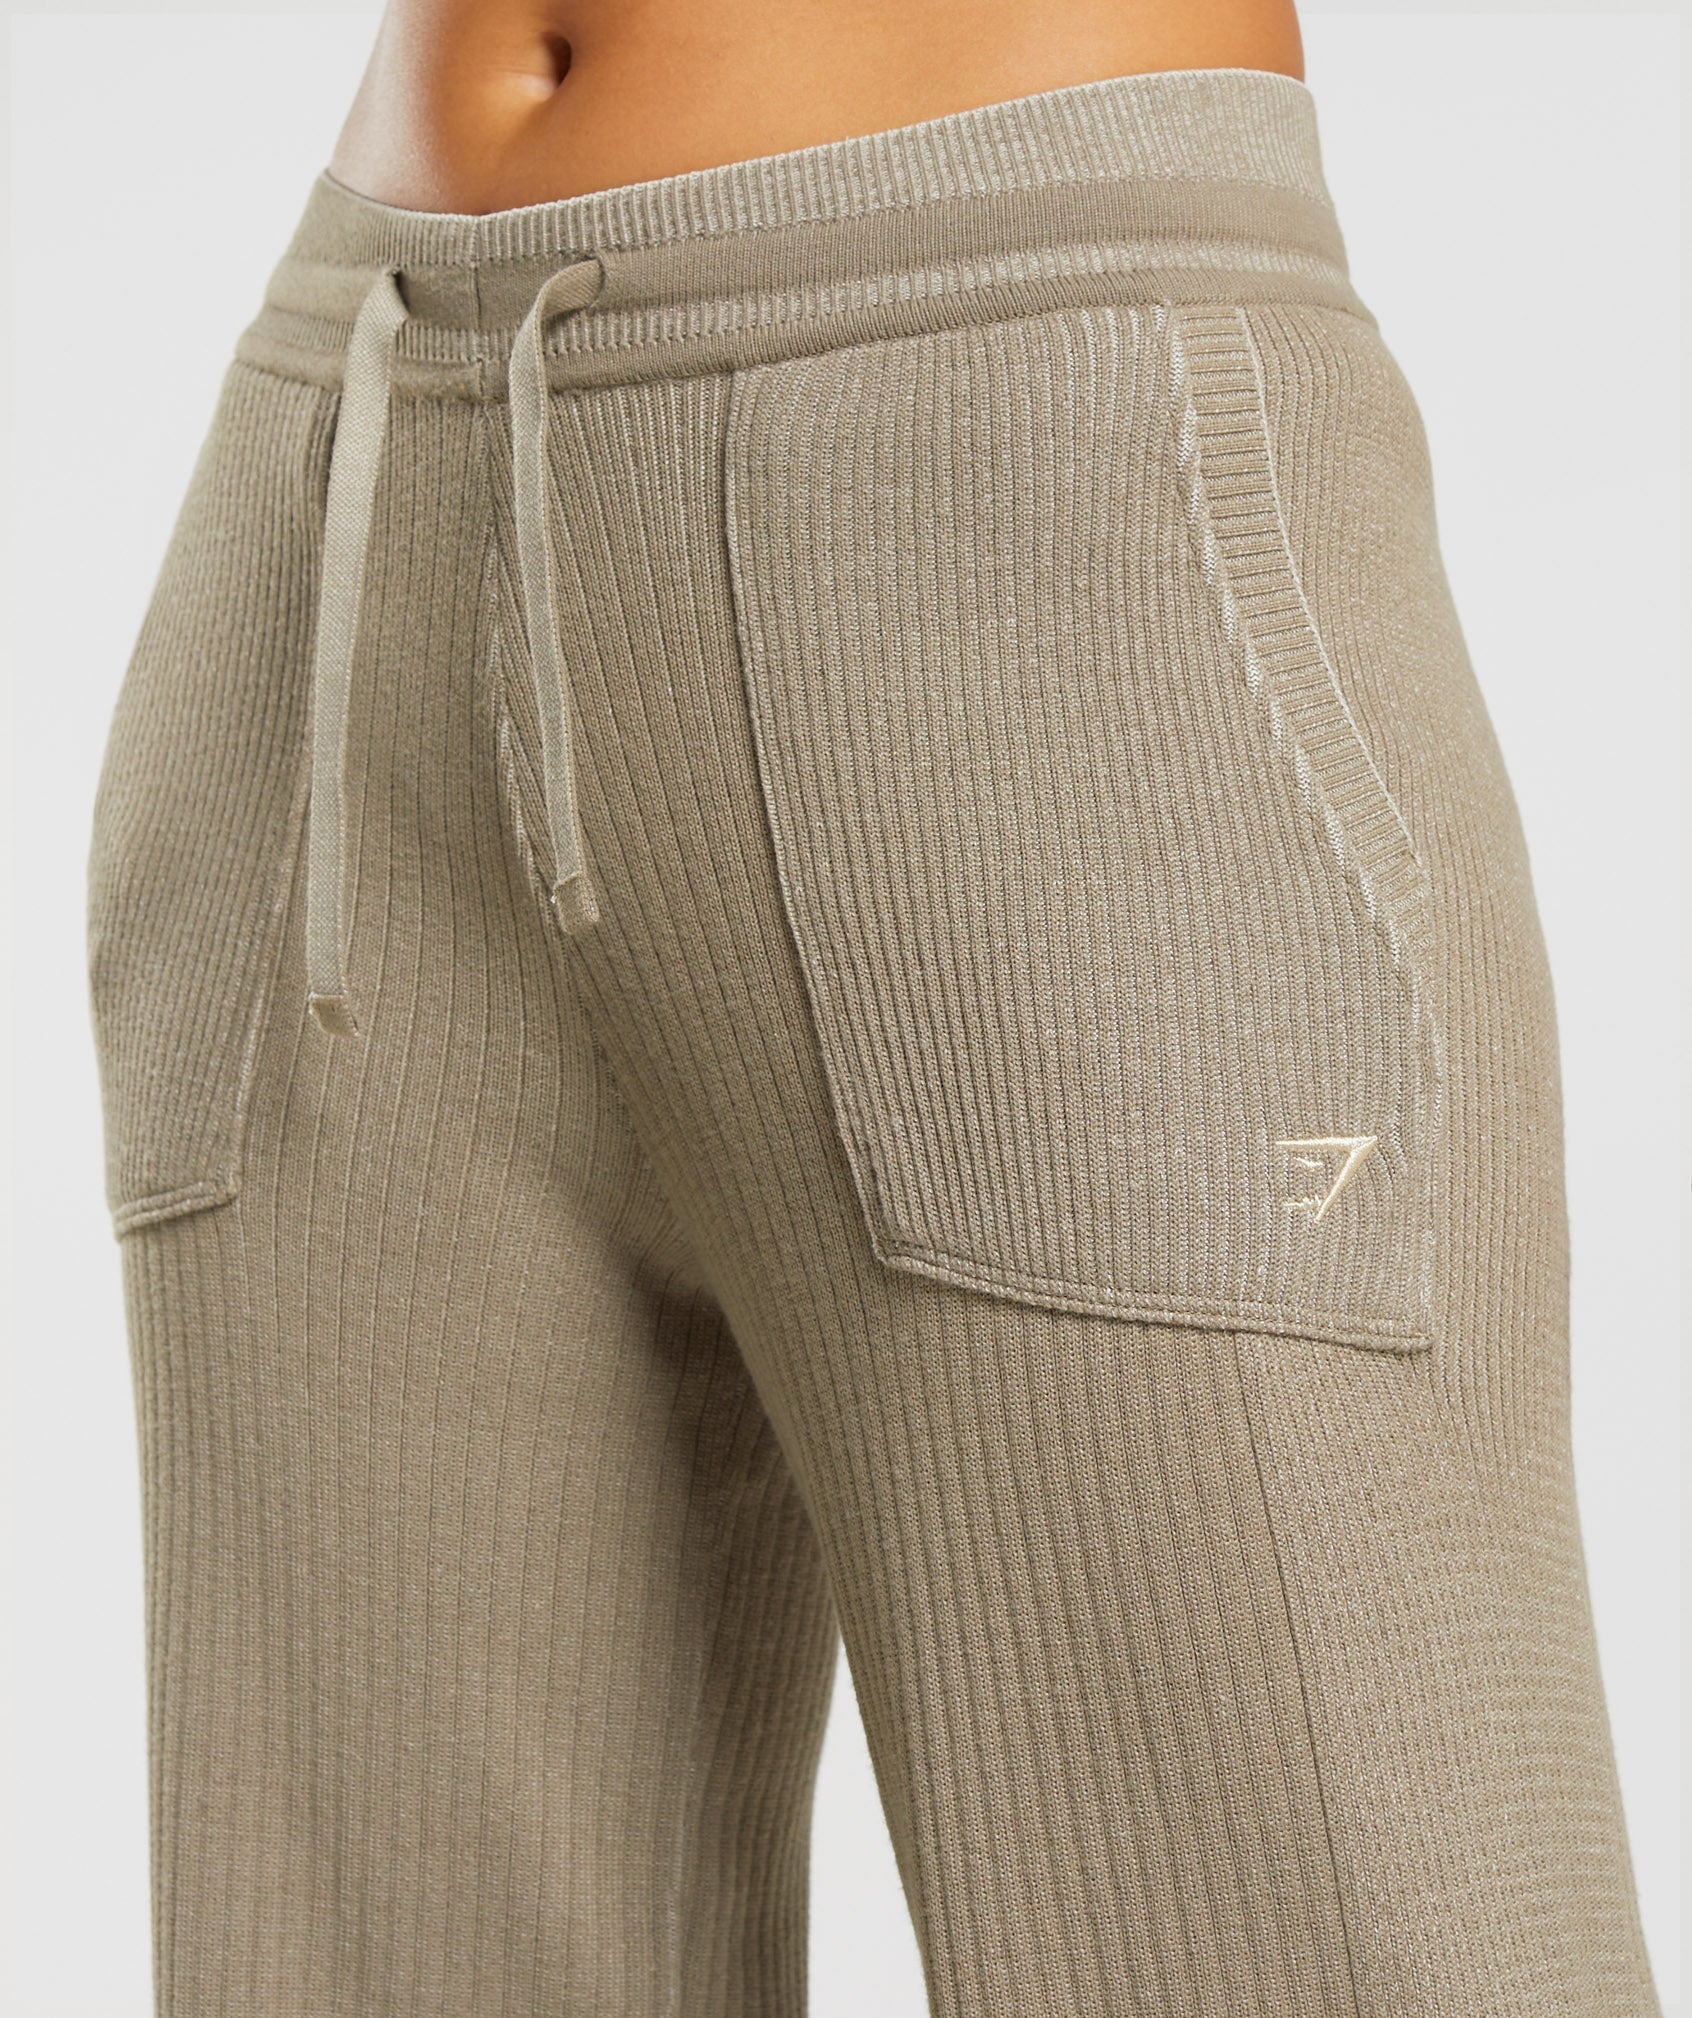 Pause Knitwear Pants in Cement Brown/Pebble Grey